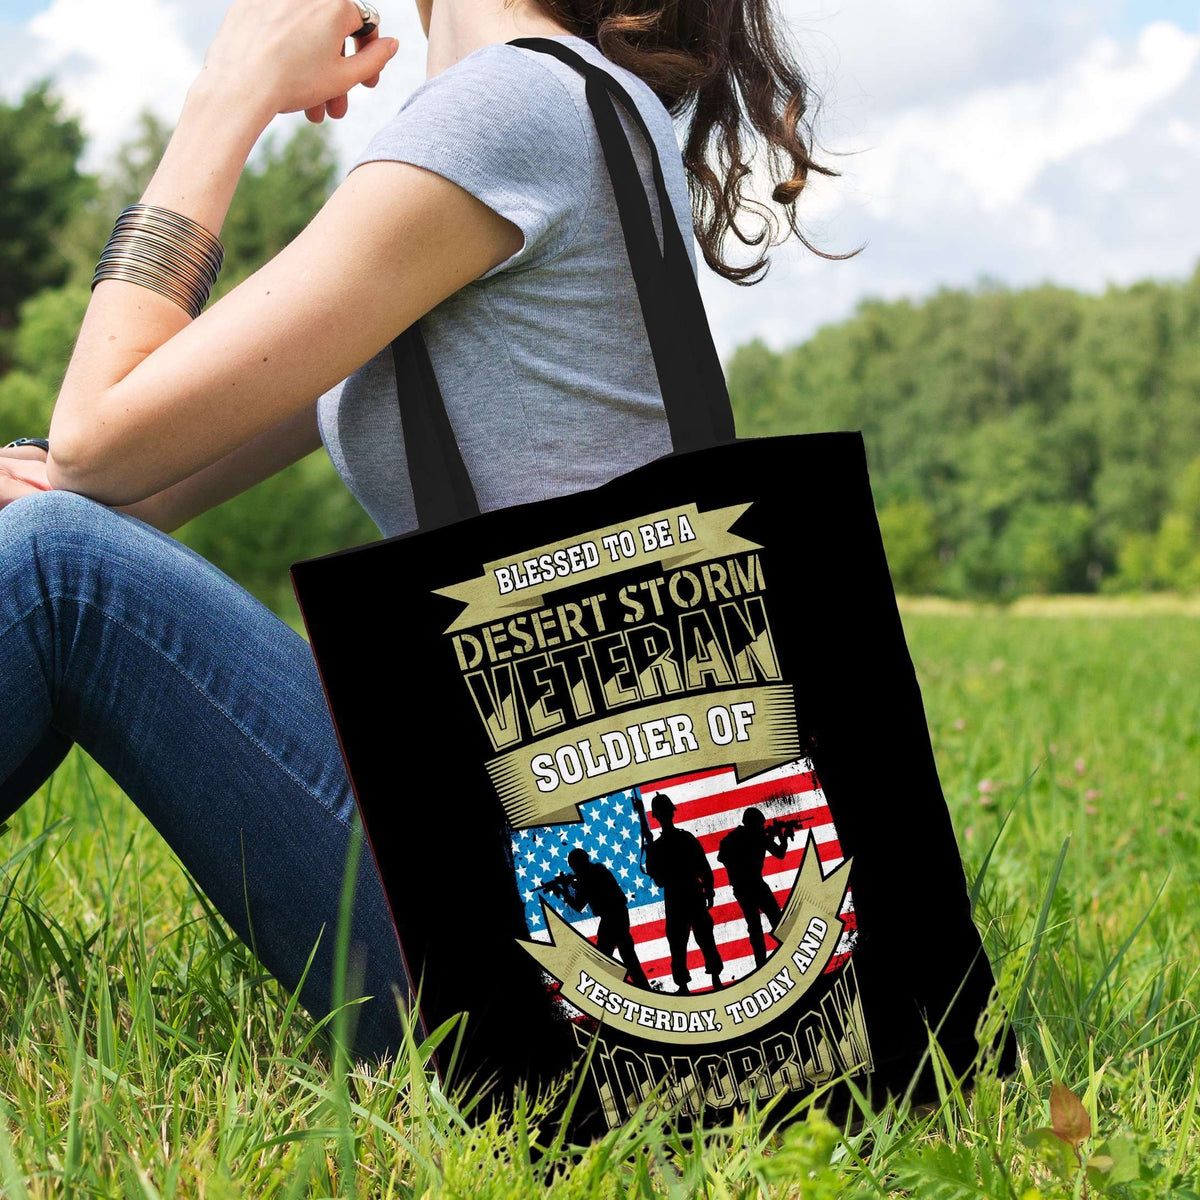 Designs by MyUtopia Shout Out:Blessed to be a Desert Storm Veteran Soldier of Yesterday Today and Tomorrow. Fabric Totebag Reusable Shopping Tote